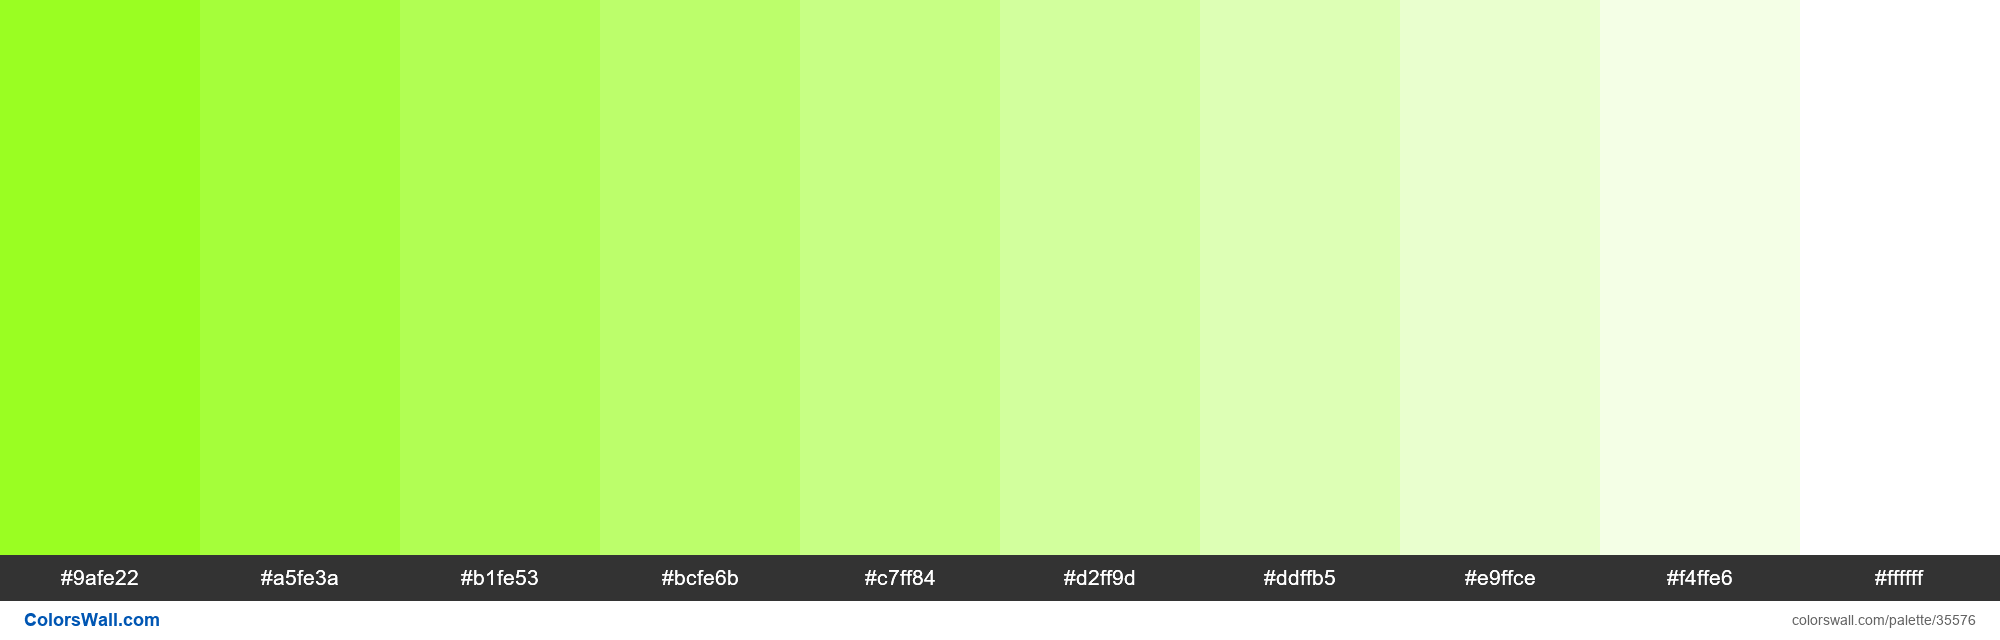 Shades XKCD Color camo green #526525 hex colors palette - ColorsWall